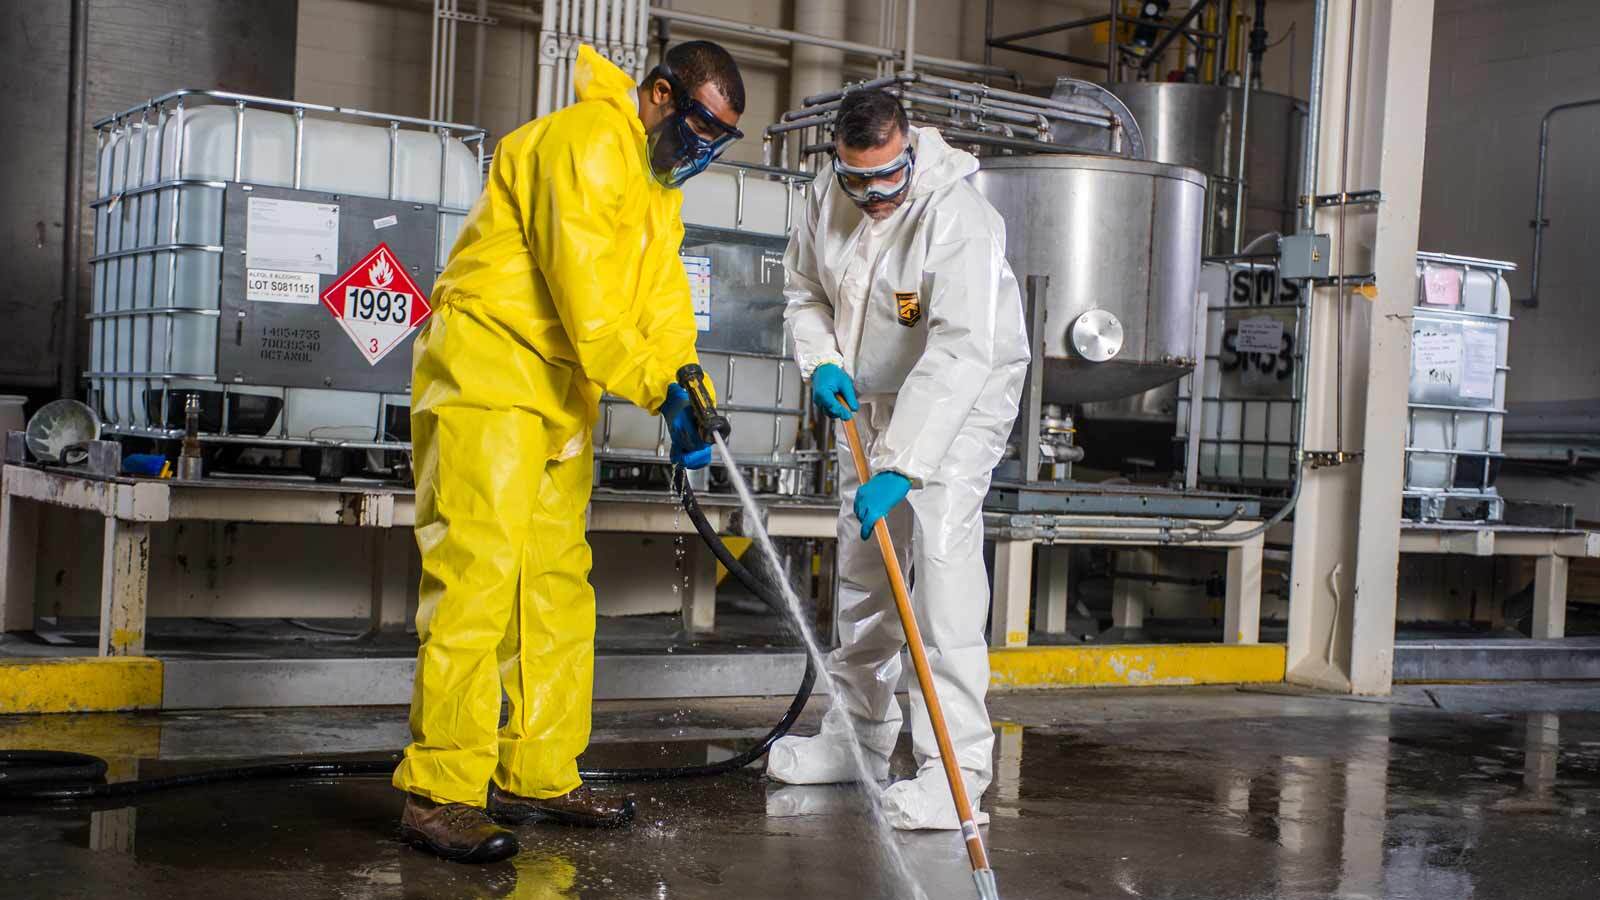 Two men cleaning a floor wearing KleenGuard protective suits